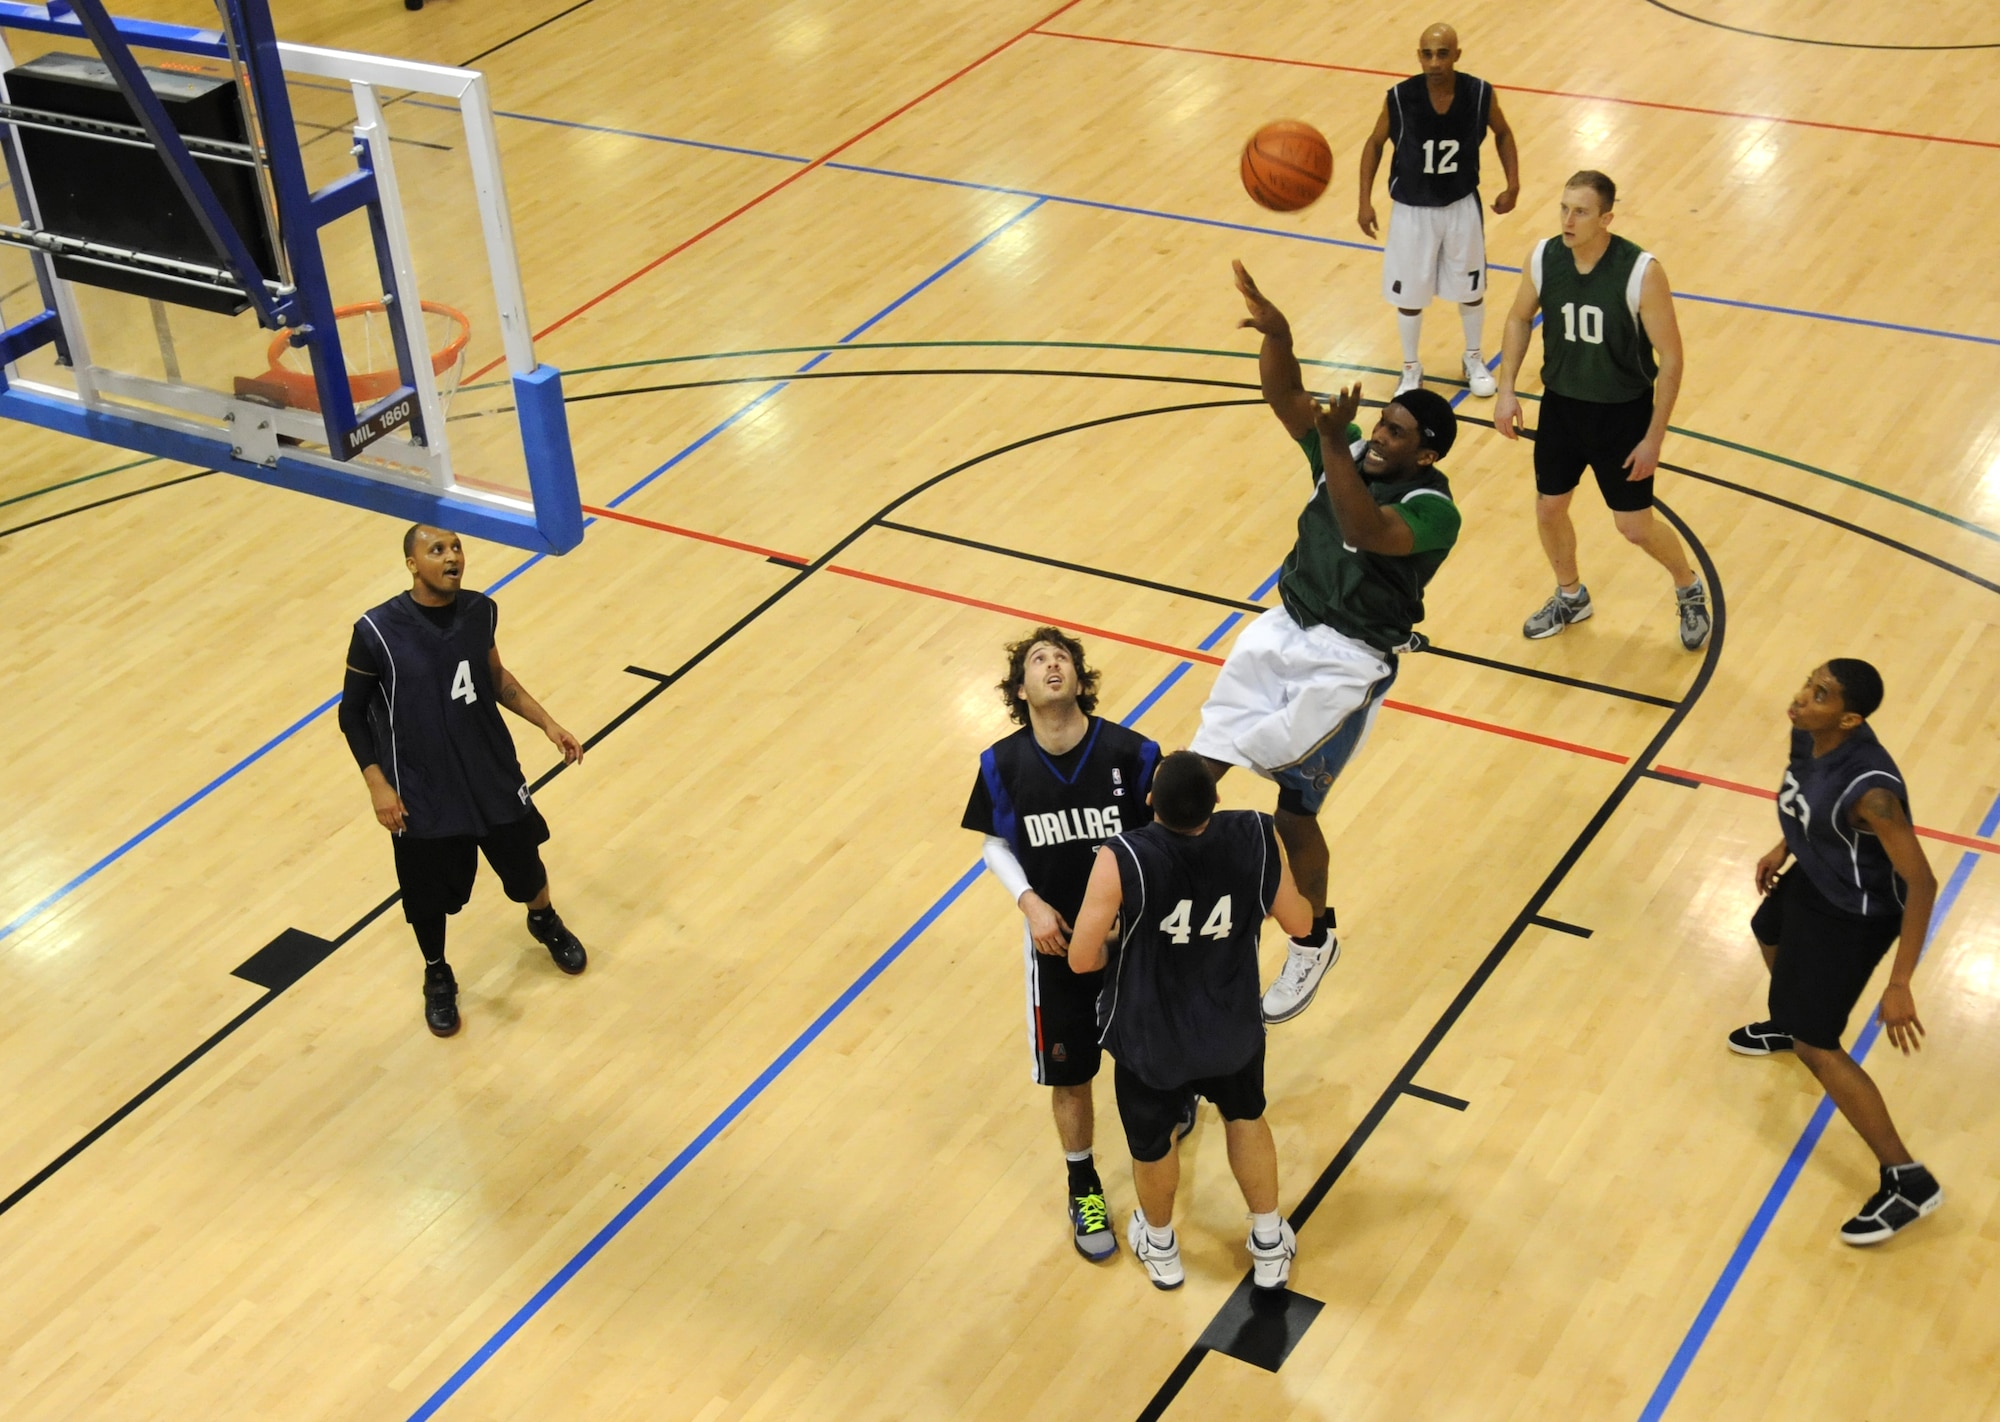 RAF MILDENHALL, England – Jonnie Story, 100th Maintenance Group, pulls up for a jump shot over Christopher Chiavuzzi and Daniel Porter, both with the 488th Intelligence Squadron, during the Intramural Basketball Championship game at the Hardstand Gym Feb. 18. Both teams battled for two 20 minute periods with MXG pulling off the upset over the IS 63-55, becoming RAF Mildenhall’s 2010 Intramural Basketball Champions. (U.S. Air Force photo/ Staff Sgt. Jerry Fleshman)